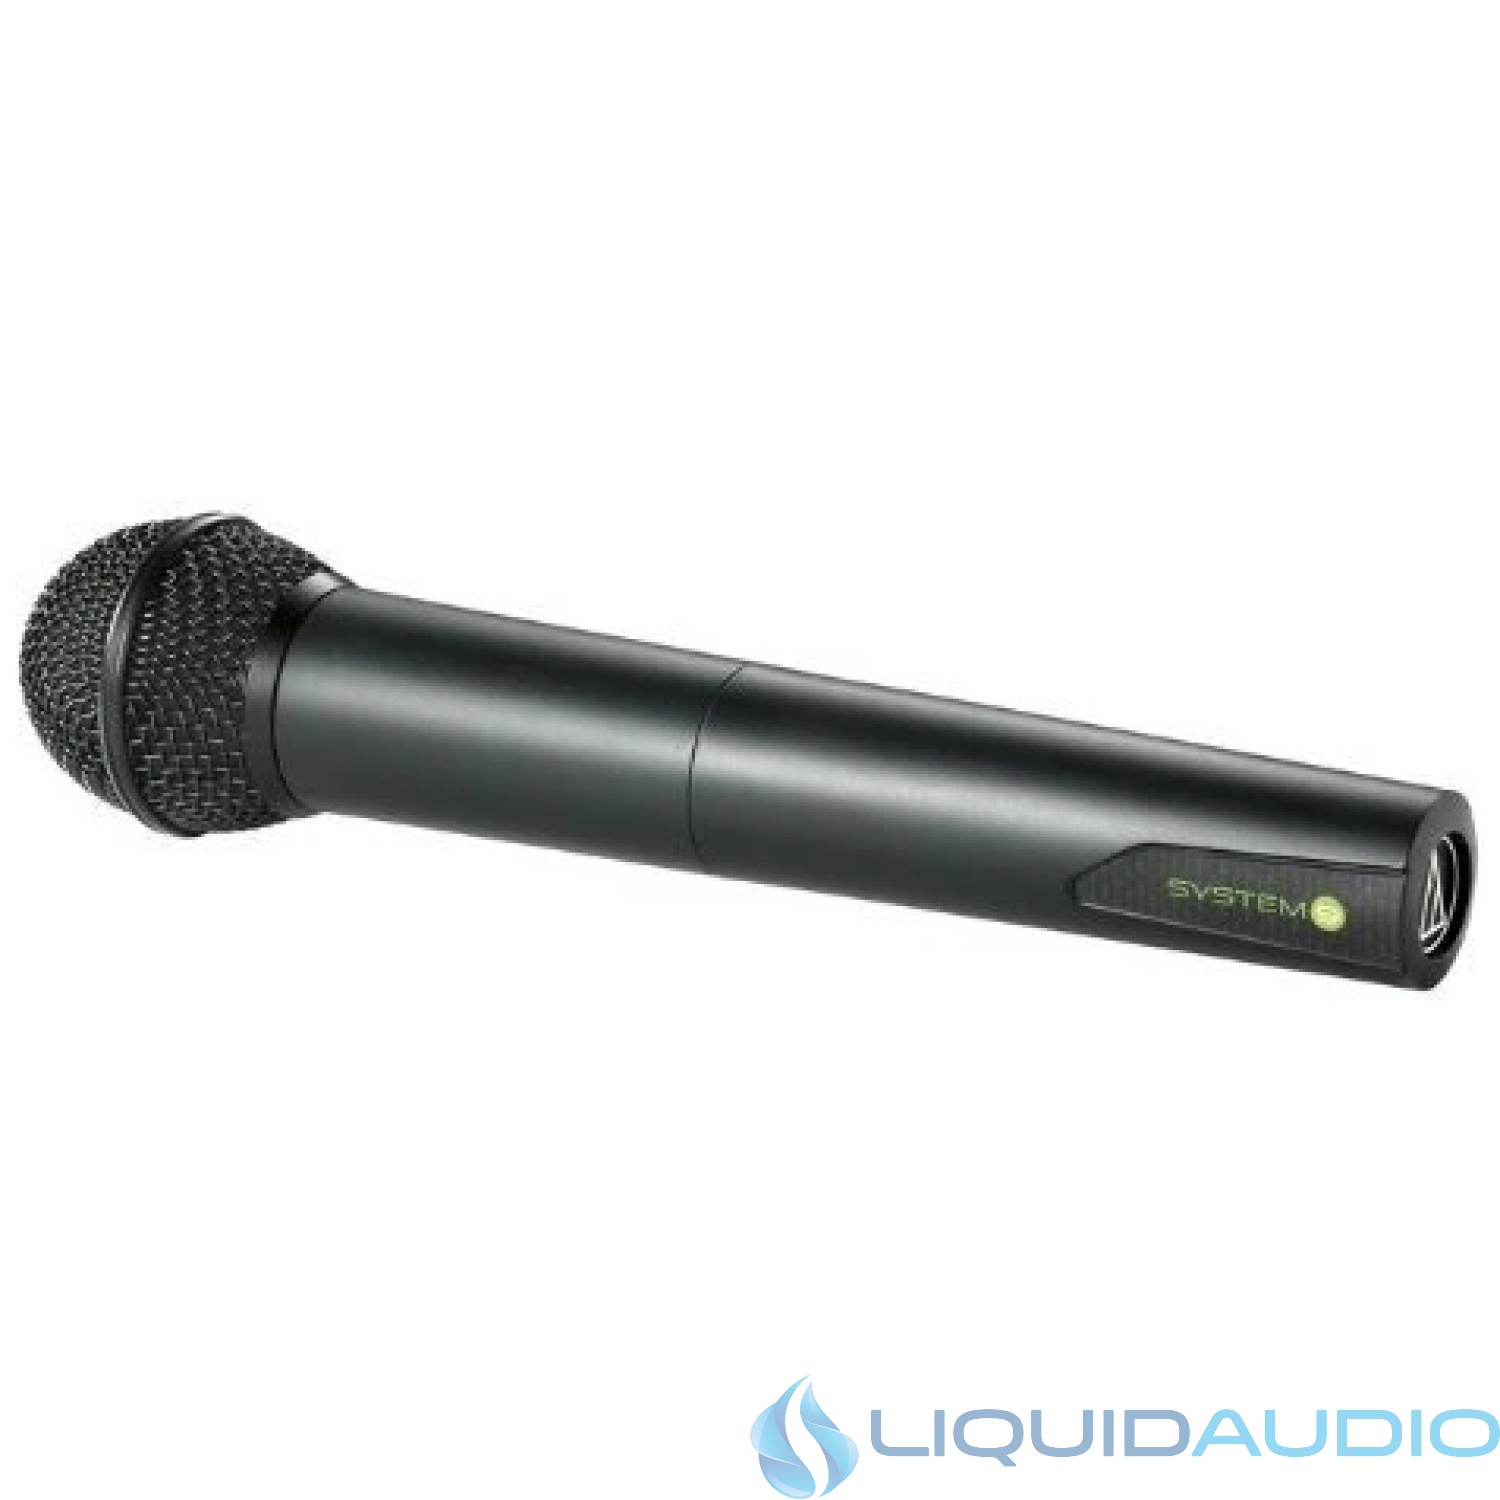 Audio-Technica ATW-T902 System 9 Unidirectional Handheld Microphone/Transmitter Only